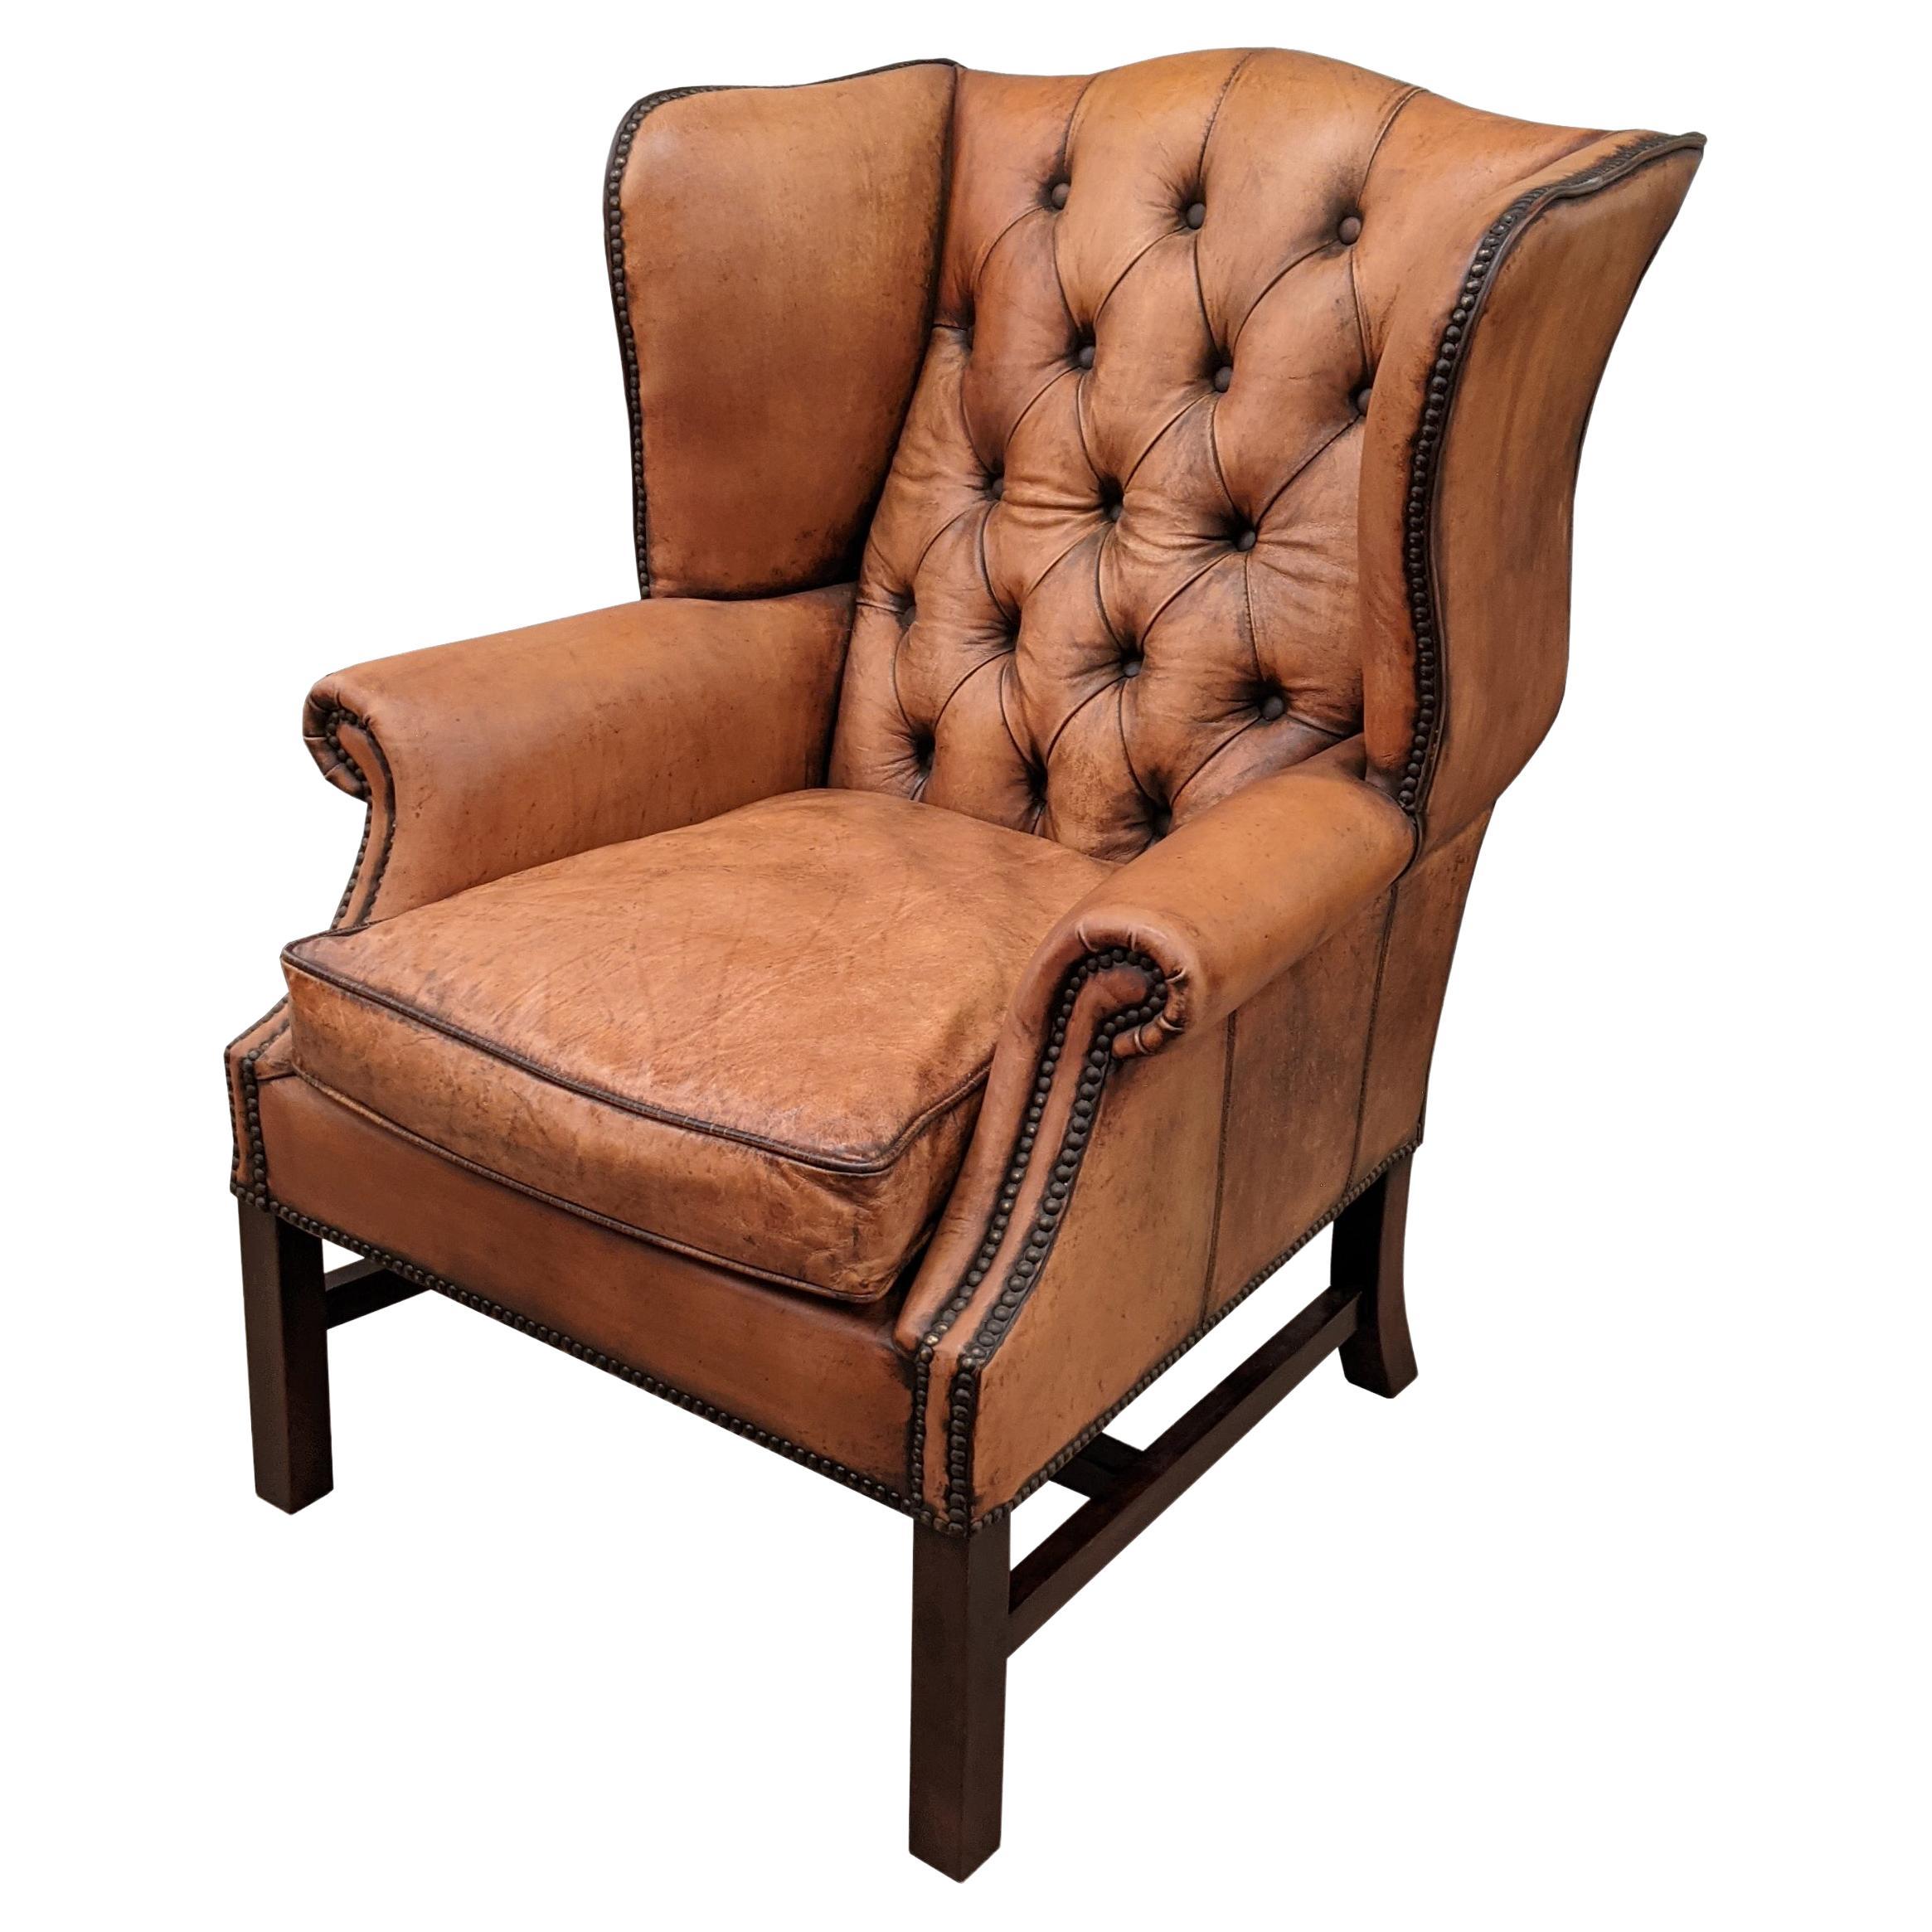 Four English Style wingback Chairs with Tufted Back, Hand Distressed Leather